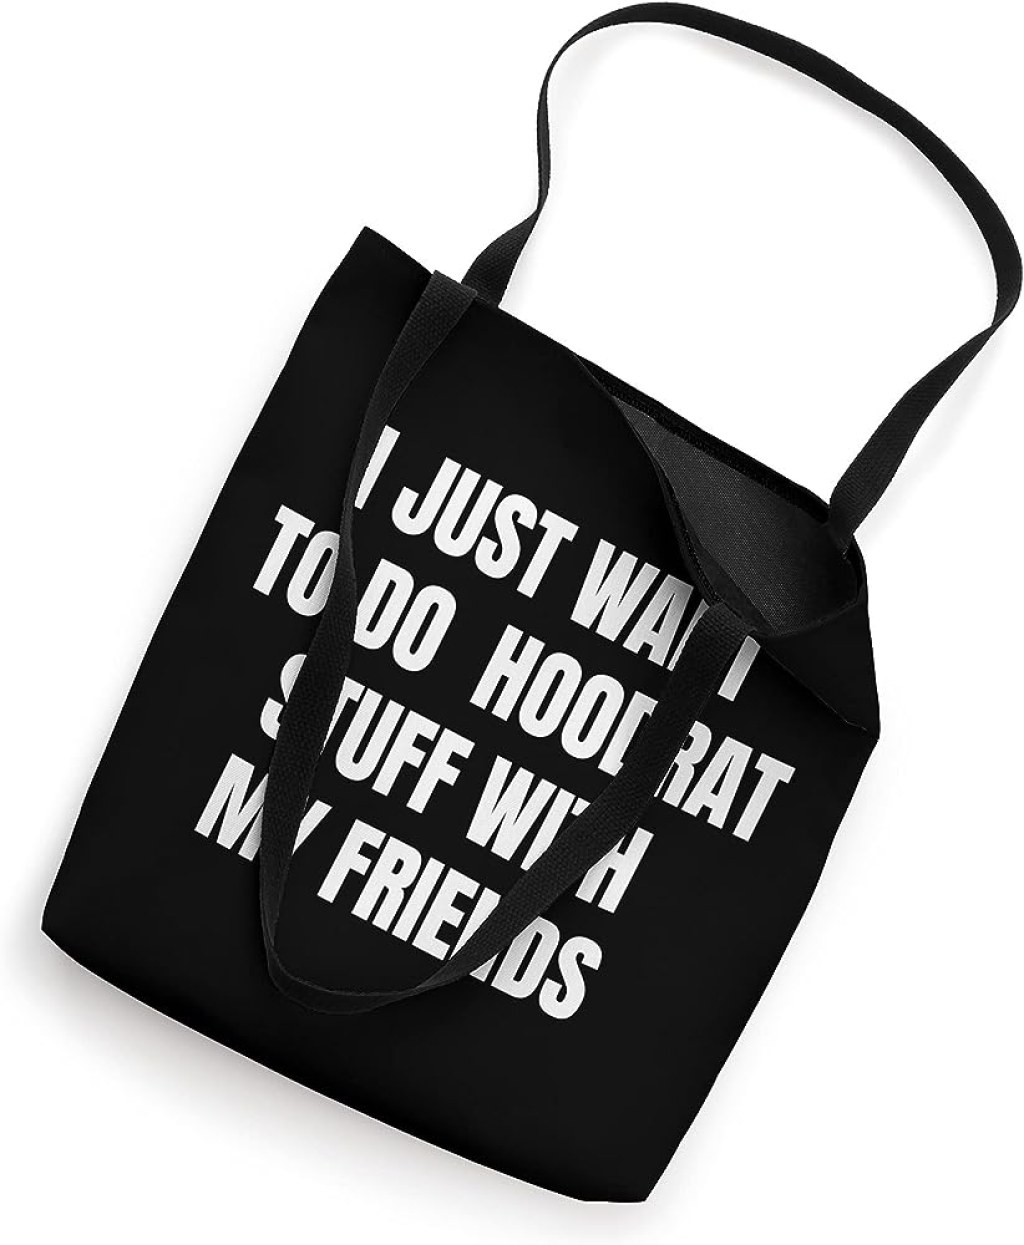 Picture of: I just want to do hoodrat stuff with my friends Tote Bag